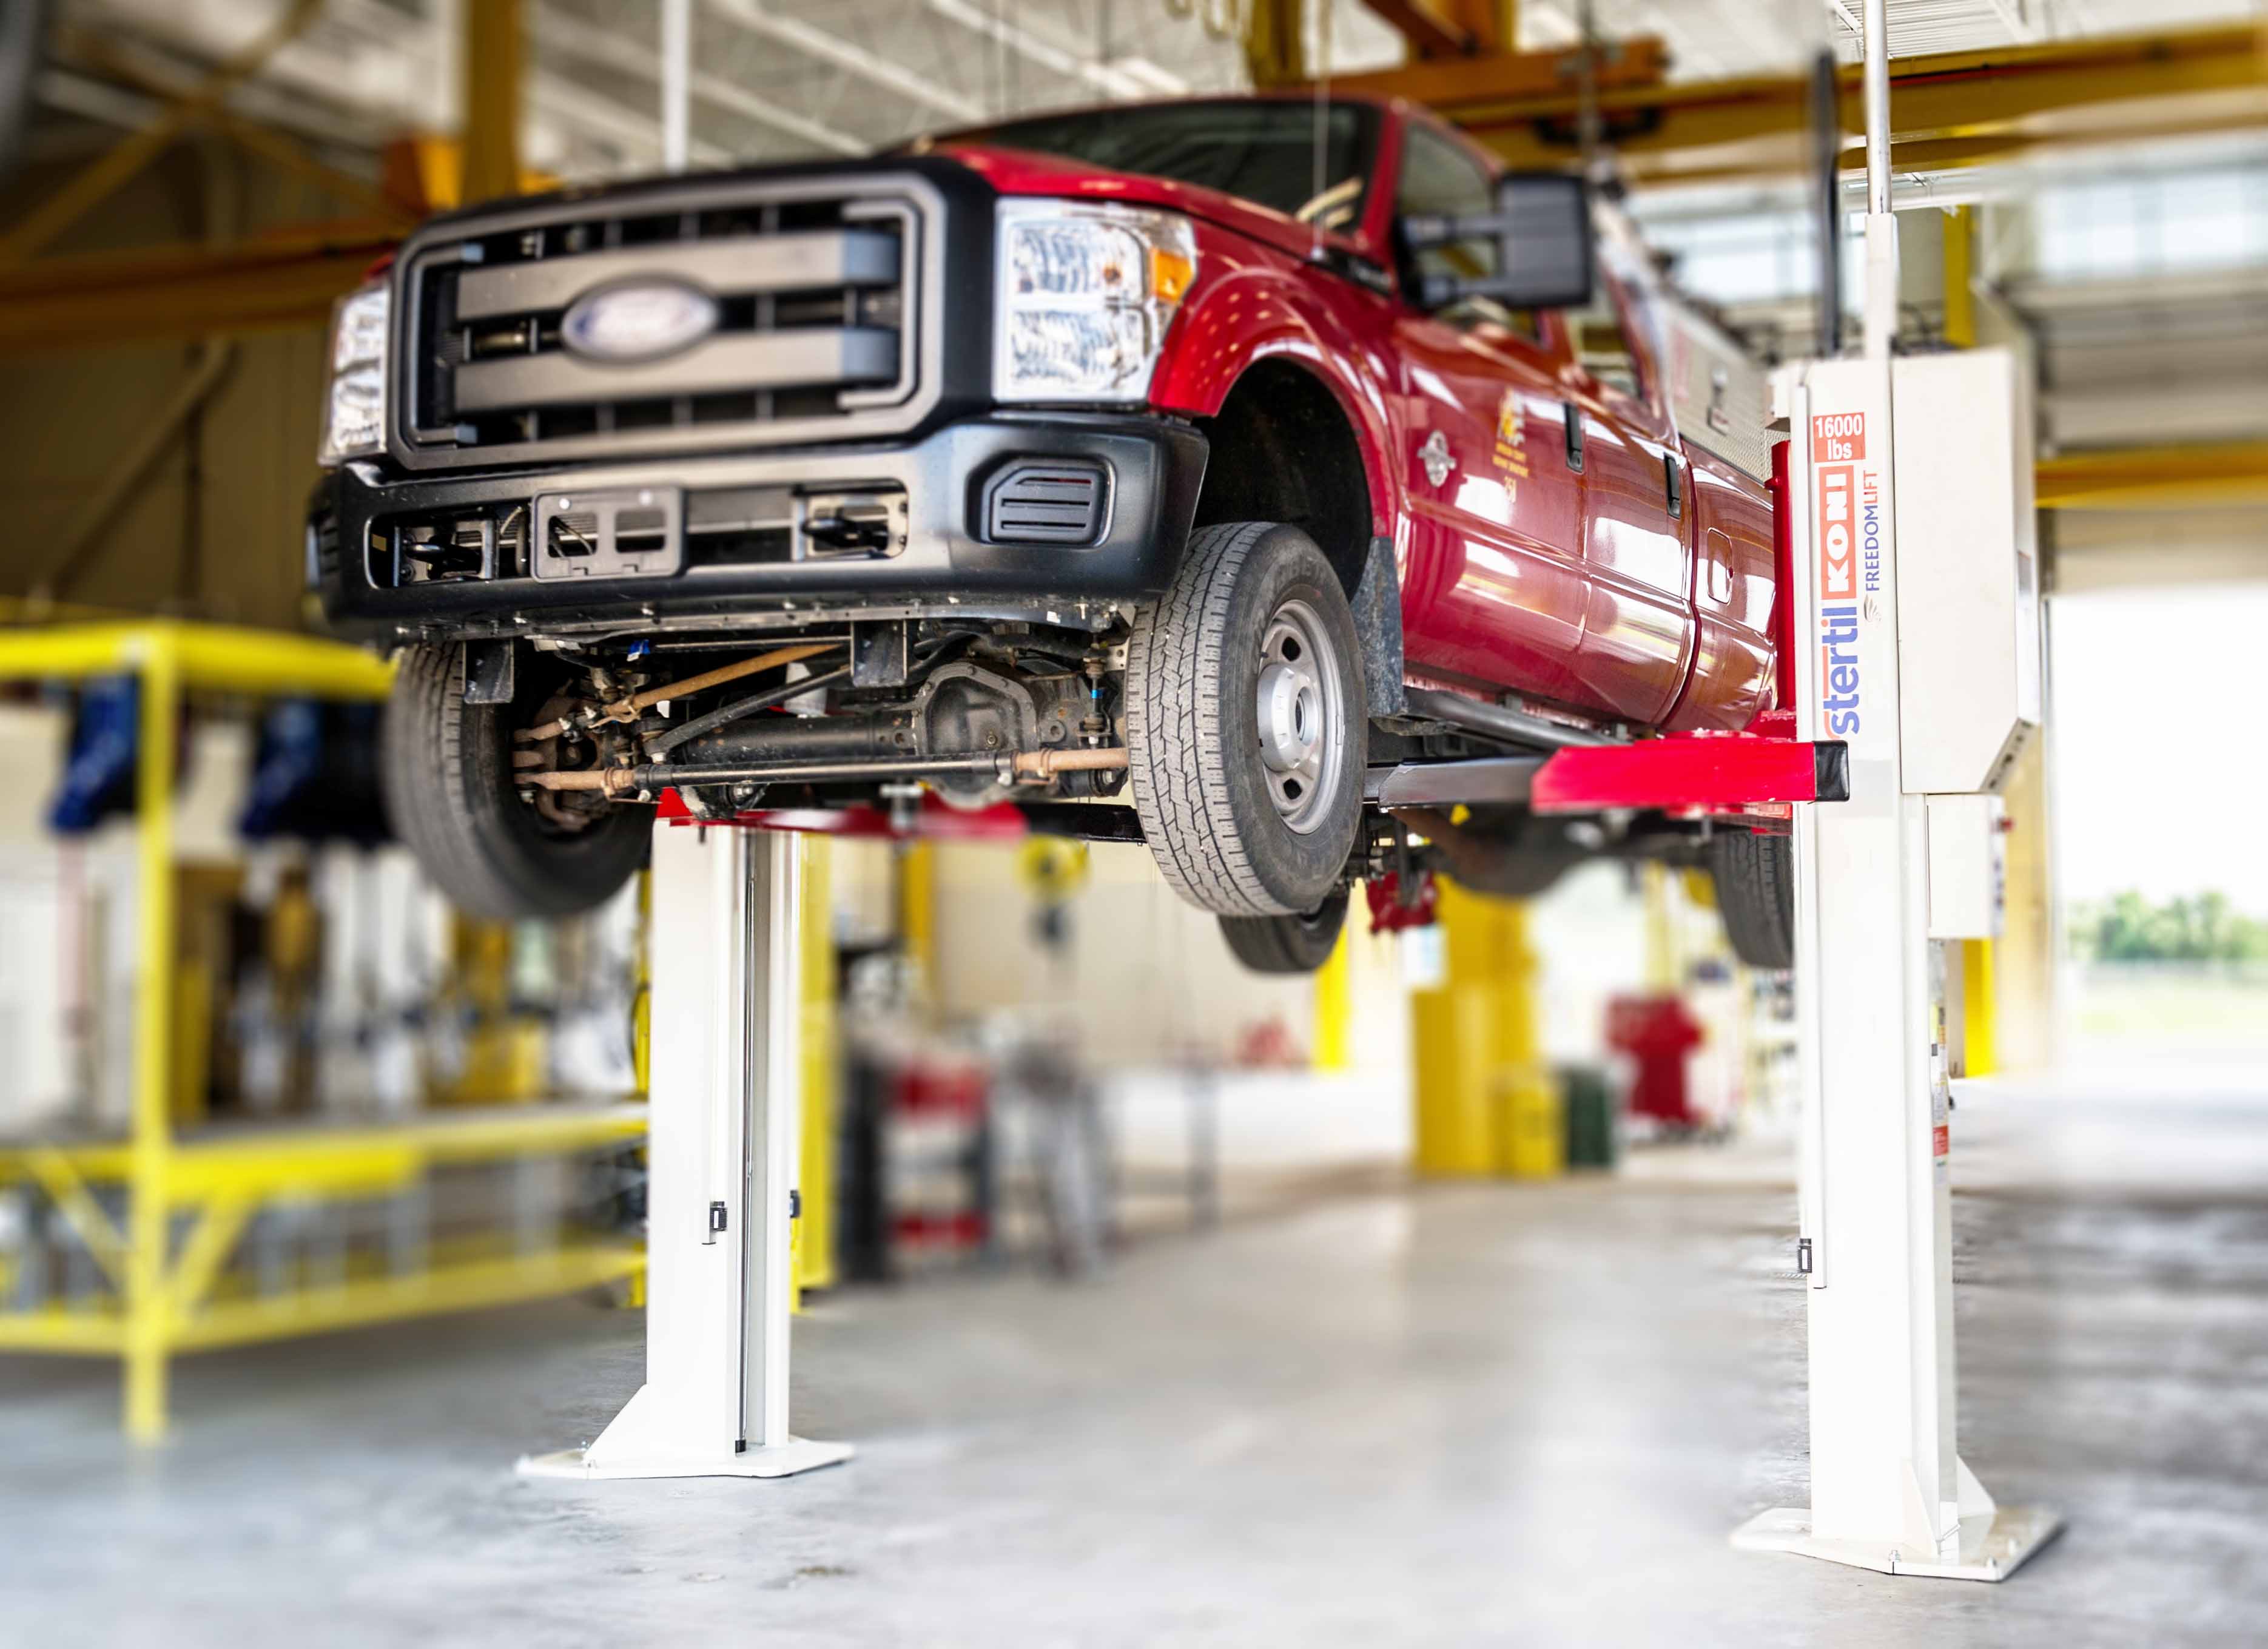 2-post lifts are an ideal choice for utility vehicles.